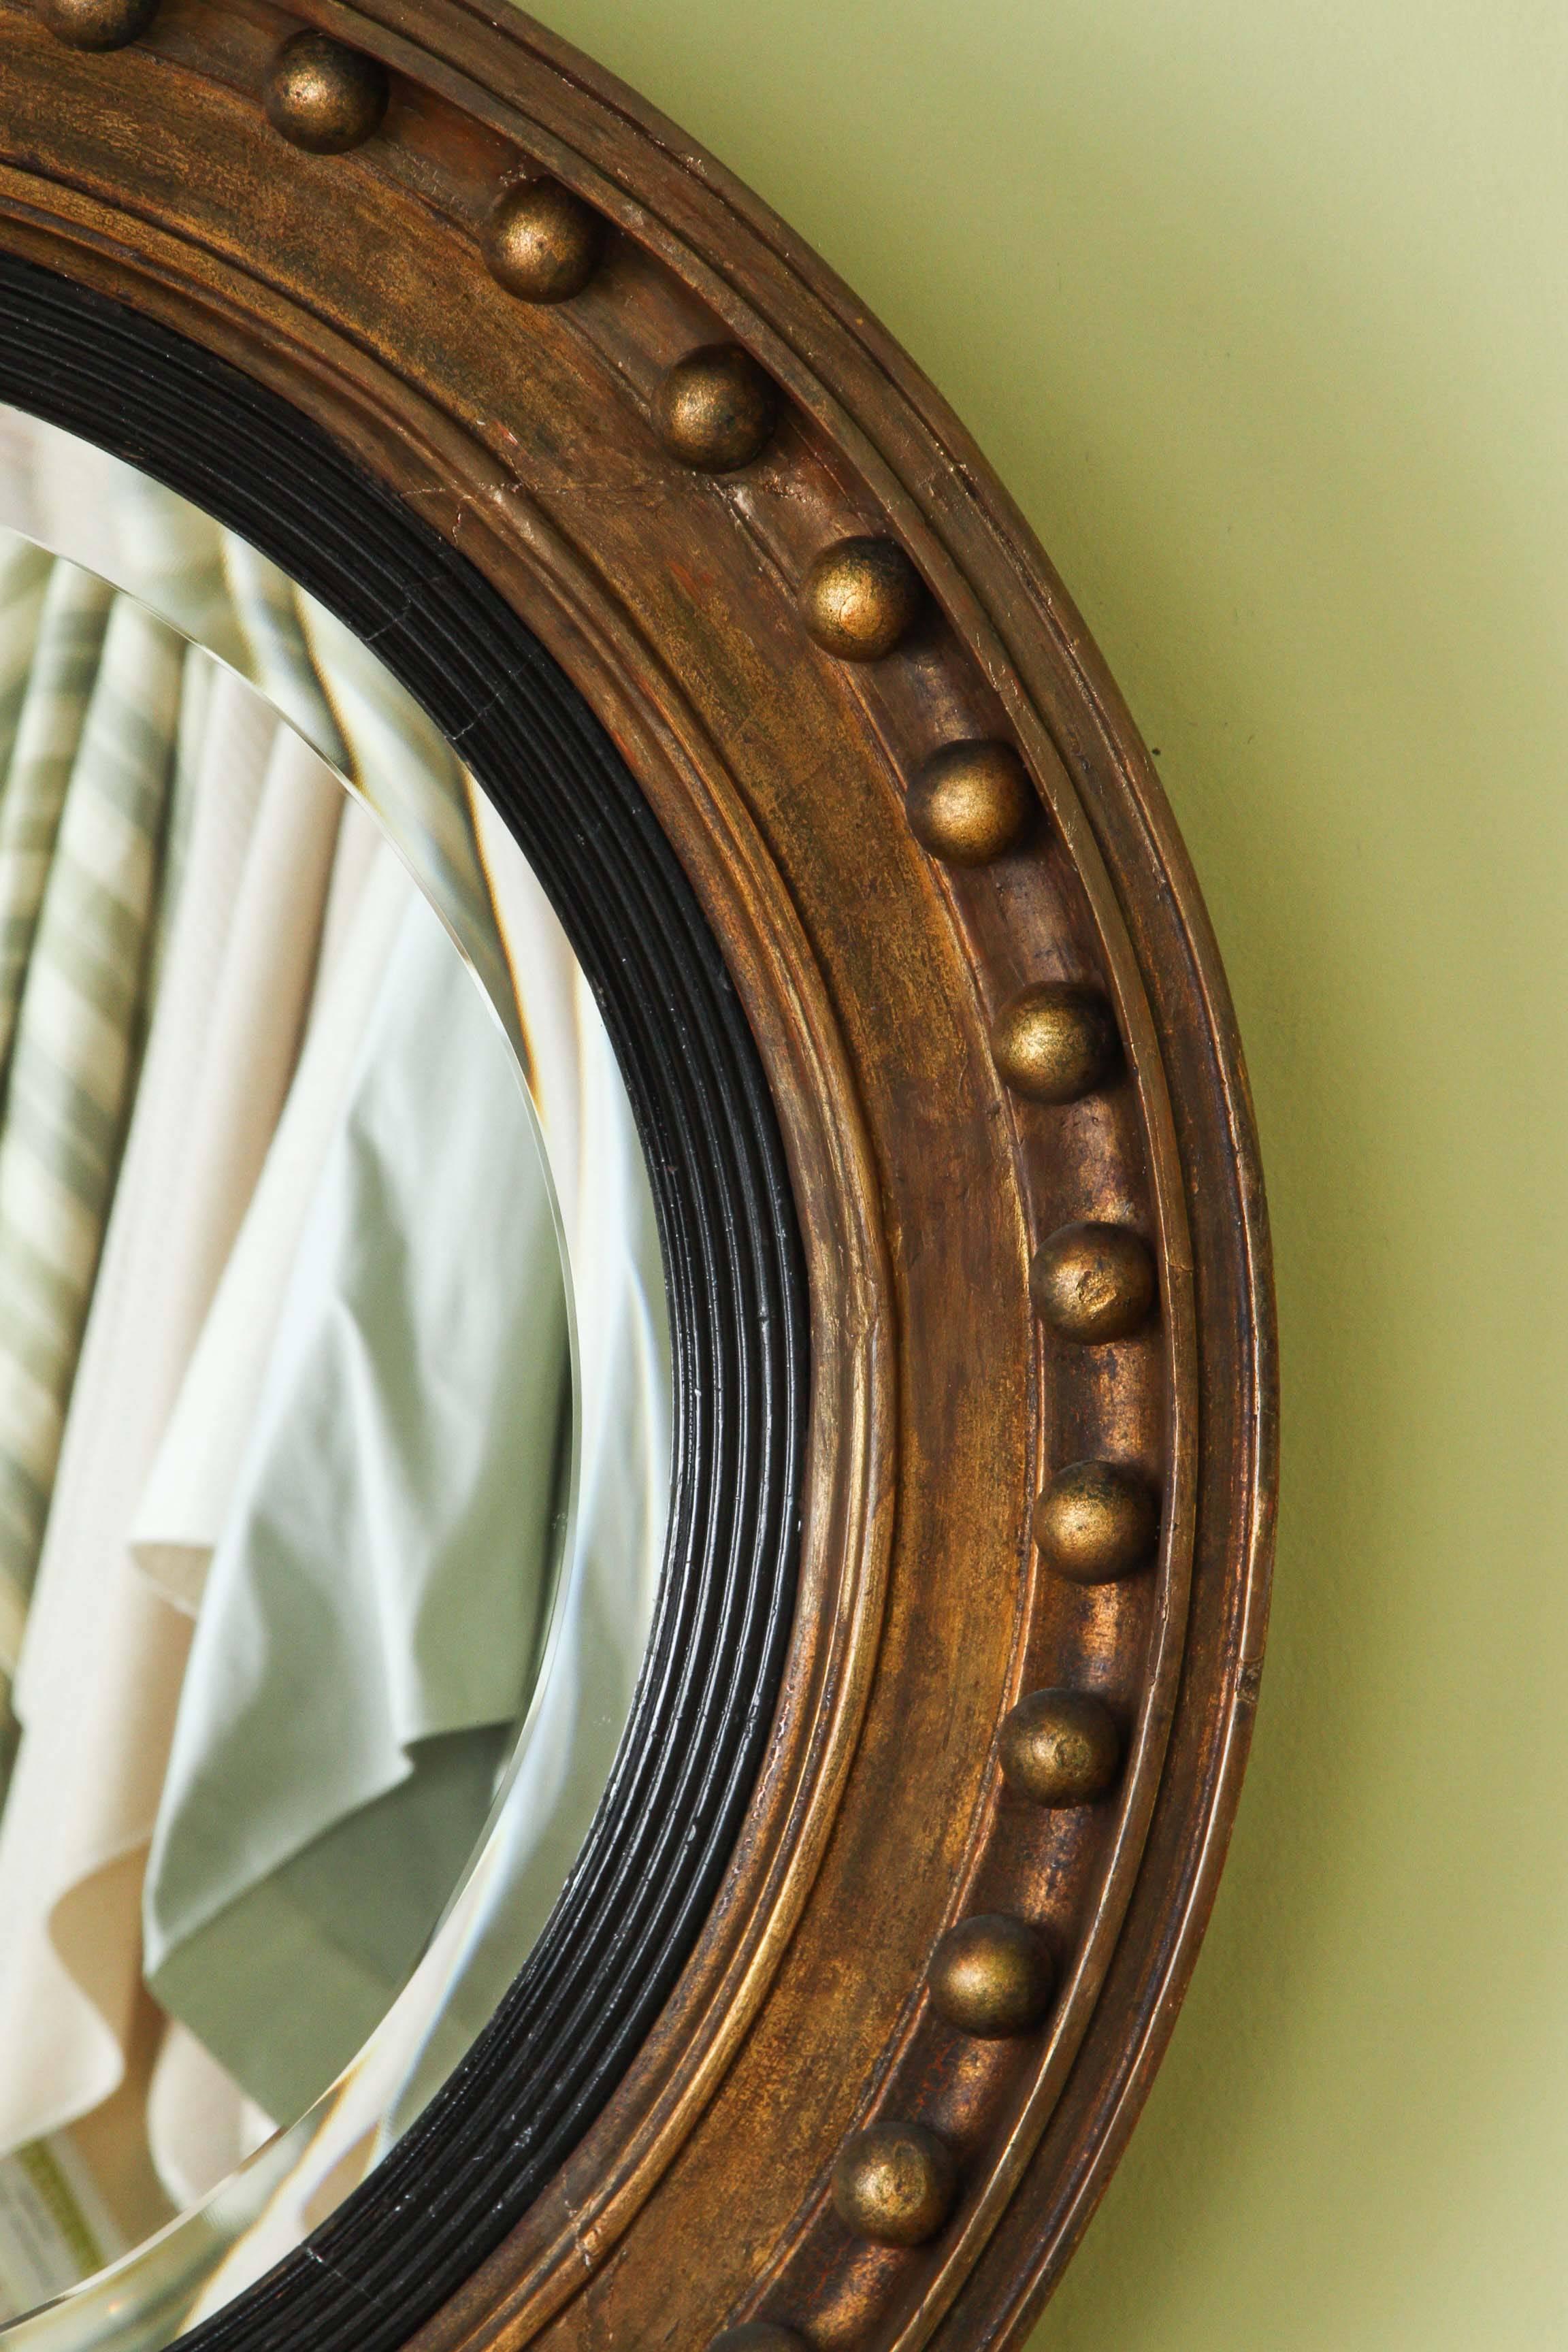 An English Regency round mirror, circa 1830, with a later, slightly convex beveled plate.